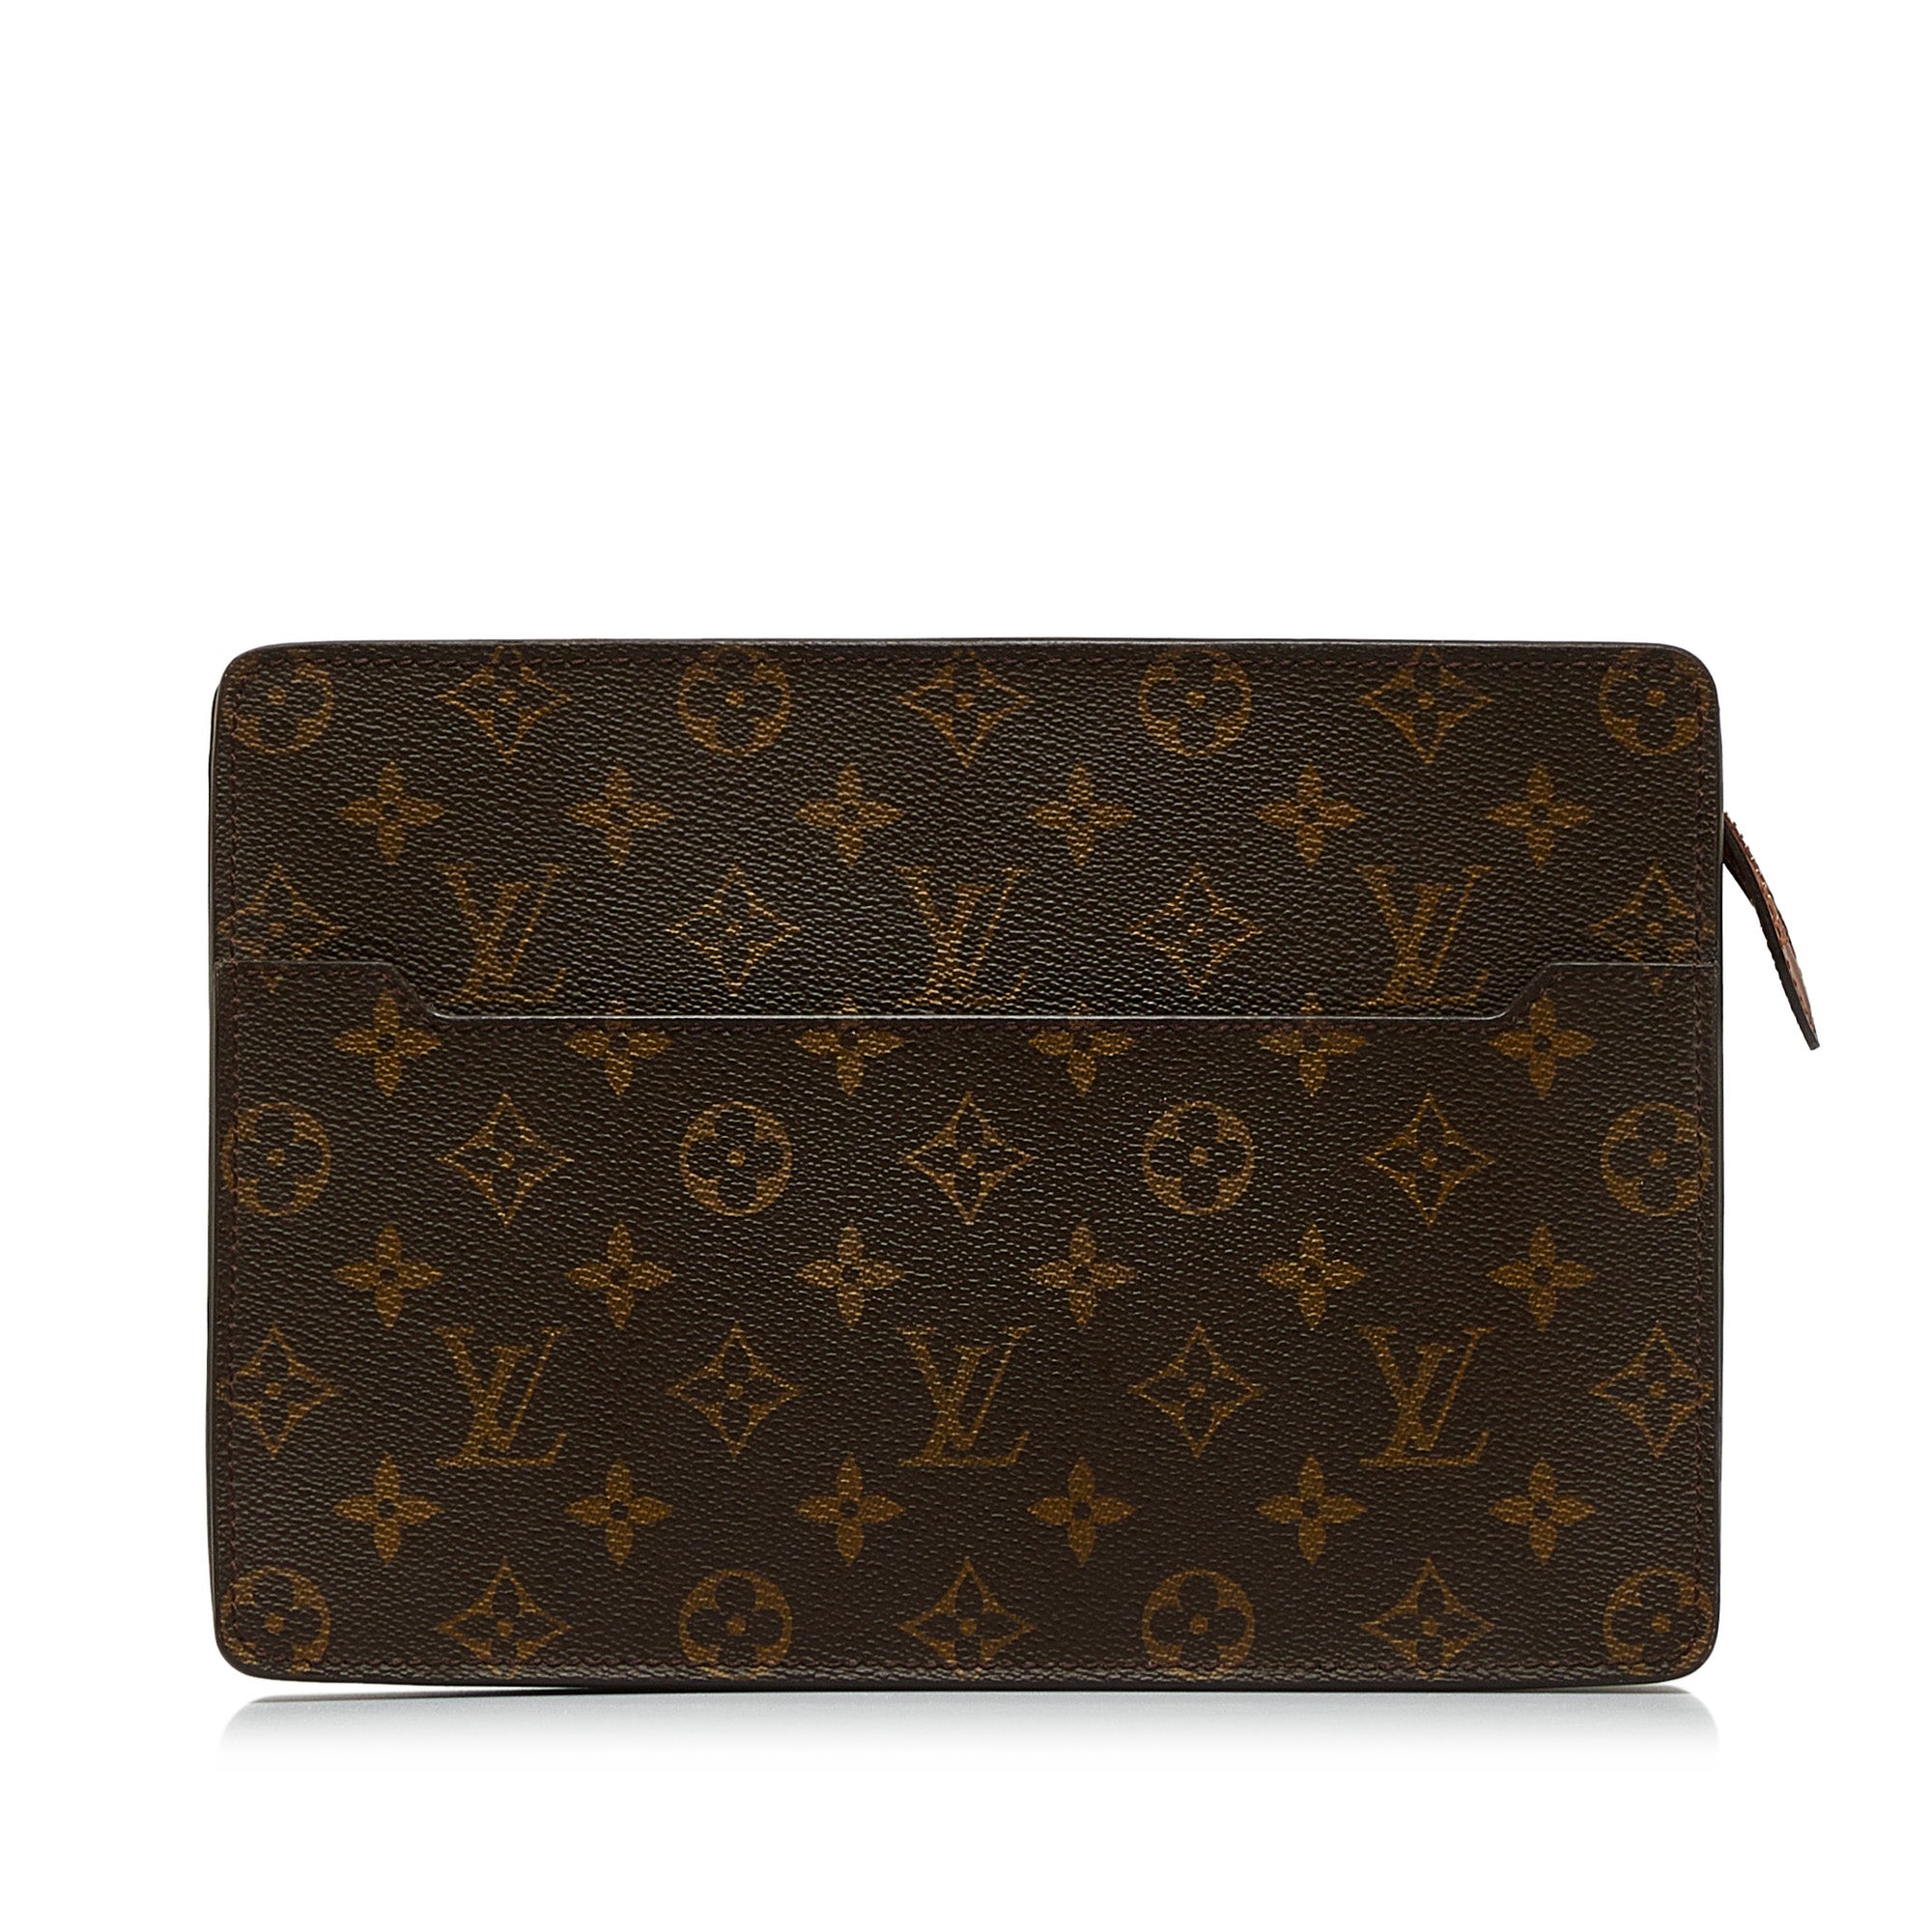 Louis Vuitton - Authenticated Pochette Accessoire Clutch Bag - Cloth Brown for Women, Never Worn, with Tag